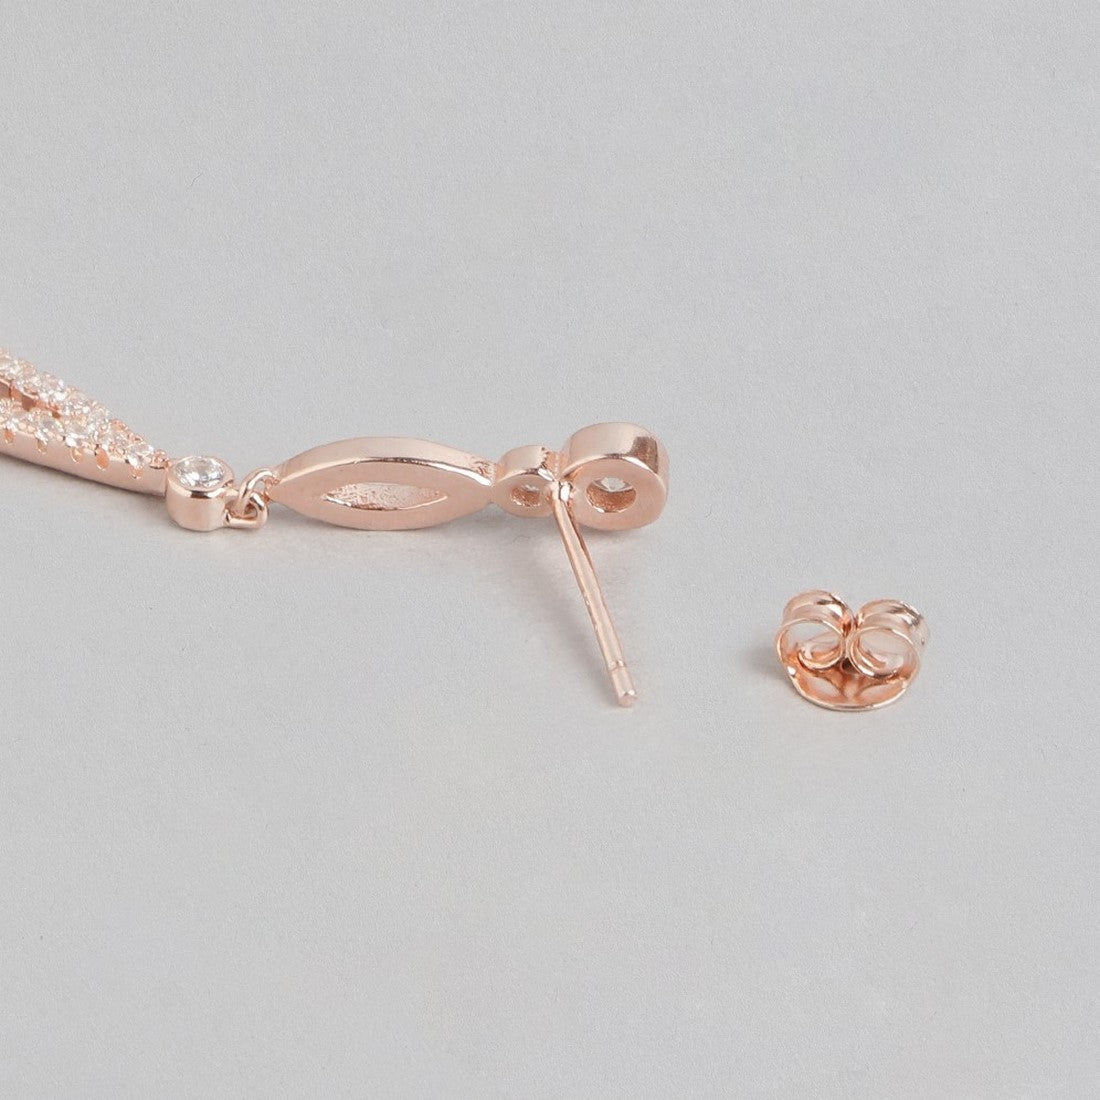 Simplicity in Radiance Rose Gold-Plated 925 Sterling Silver Solitaire Earrings